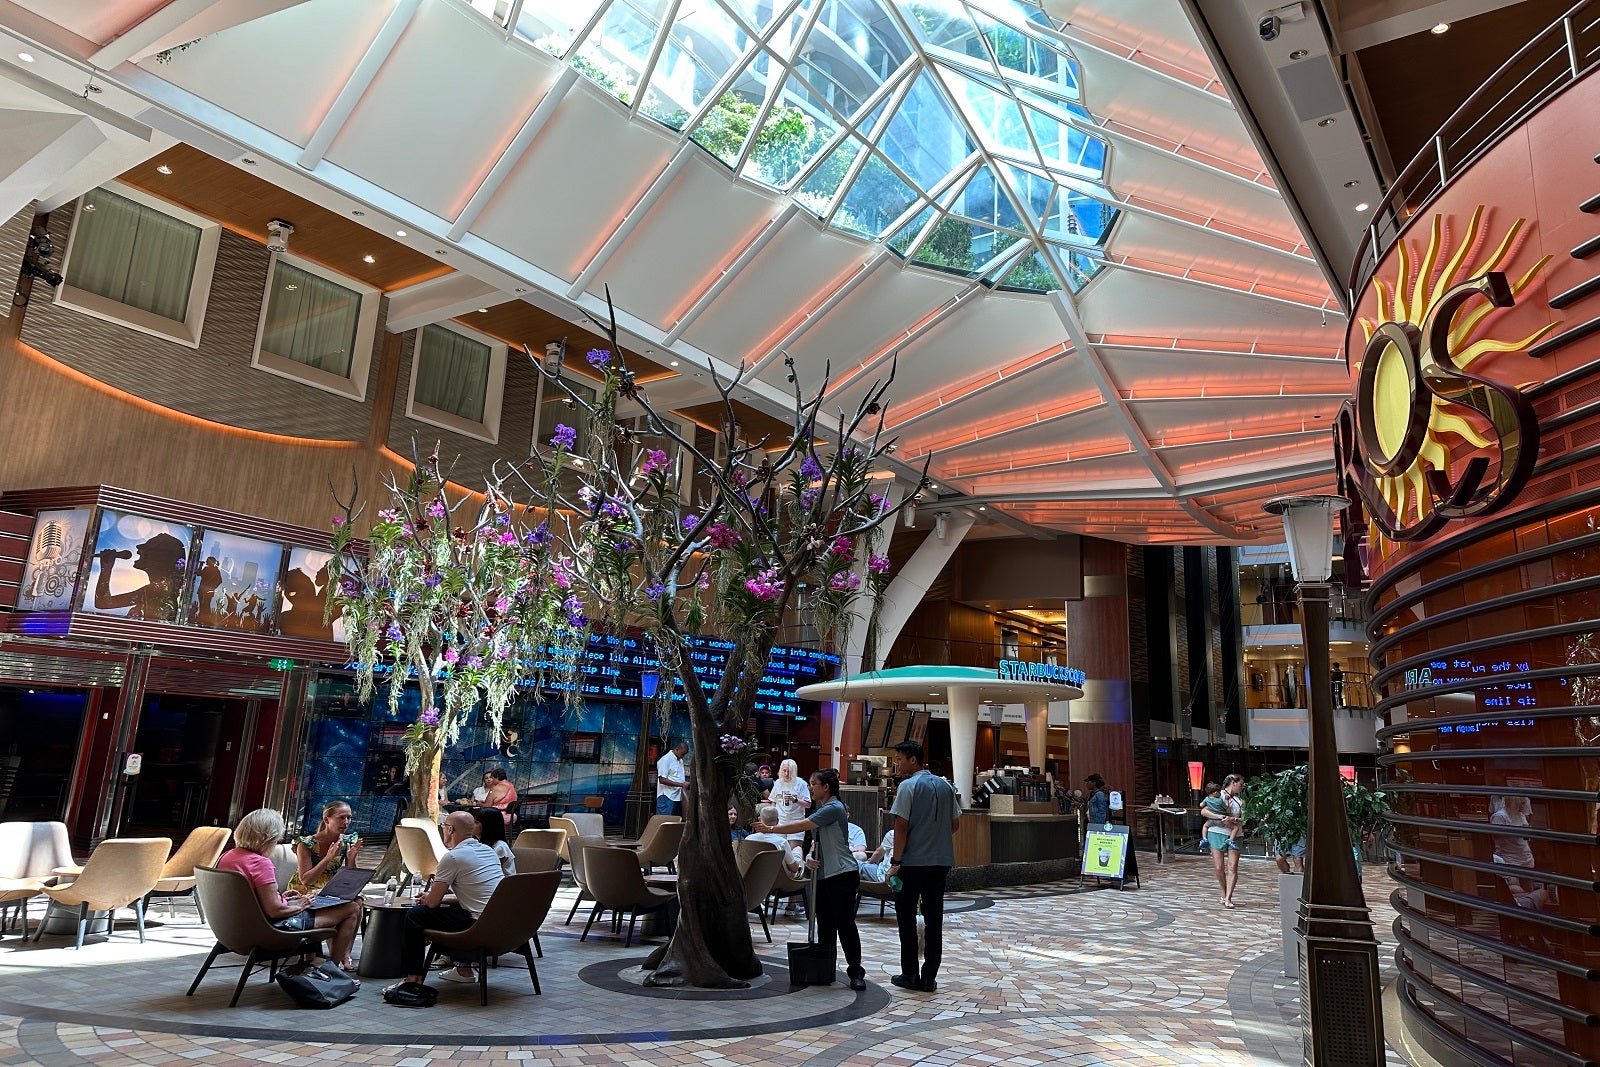 Read more about the article Royal Caribbean’s Royal Promenade: What you’ll find on this major cruise ship thoroughfare